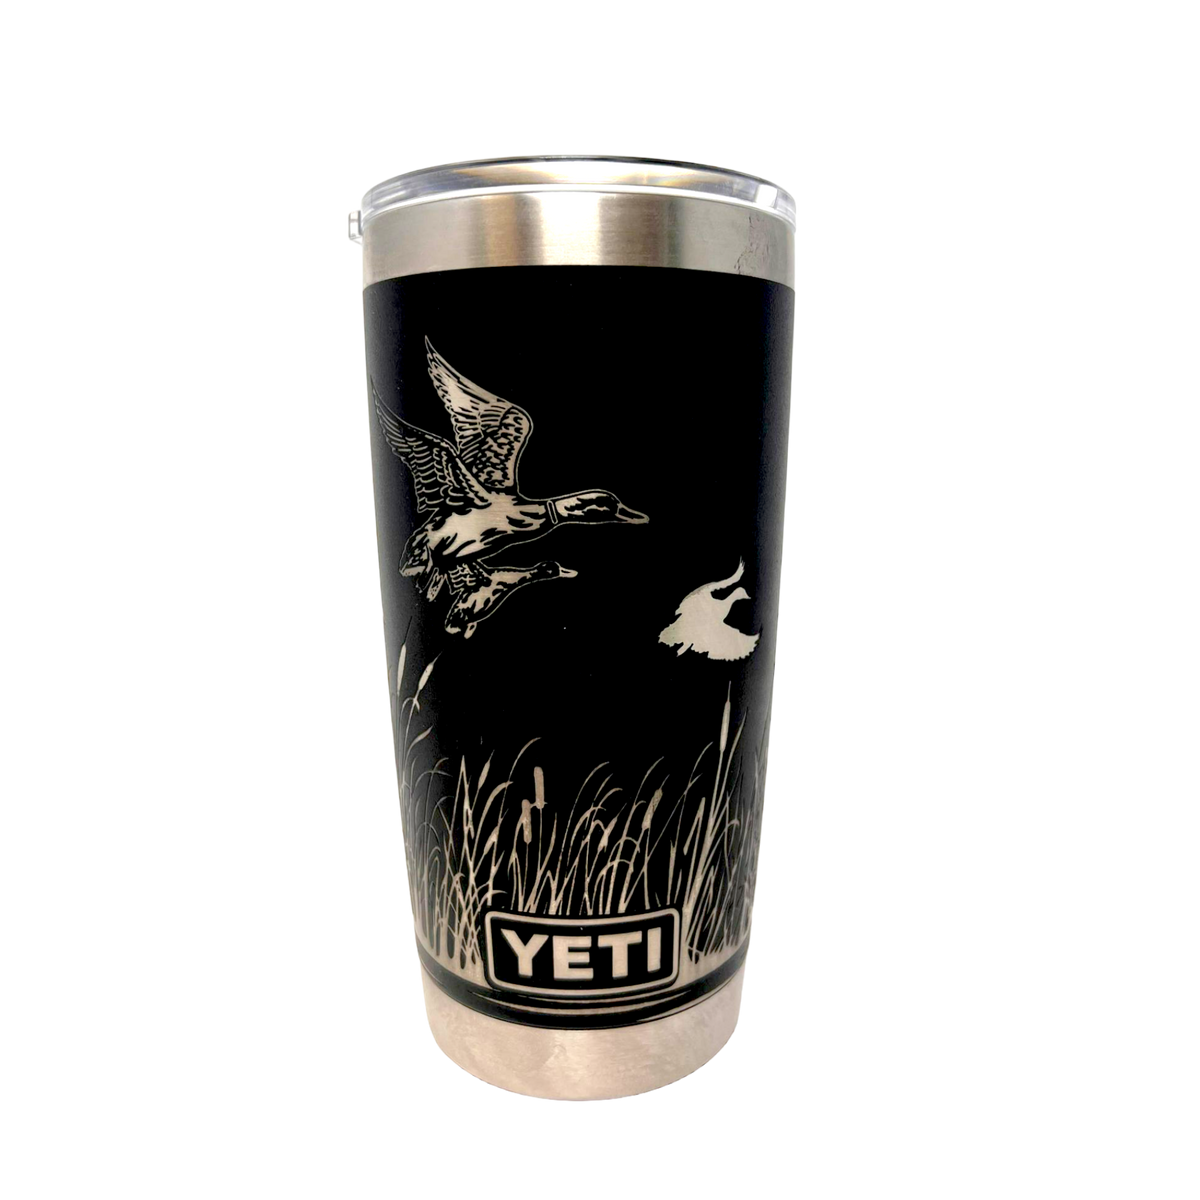 Duck Hunting Yeti | Wind River Outpost